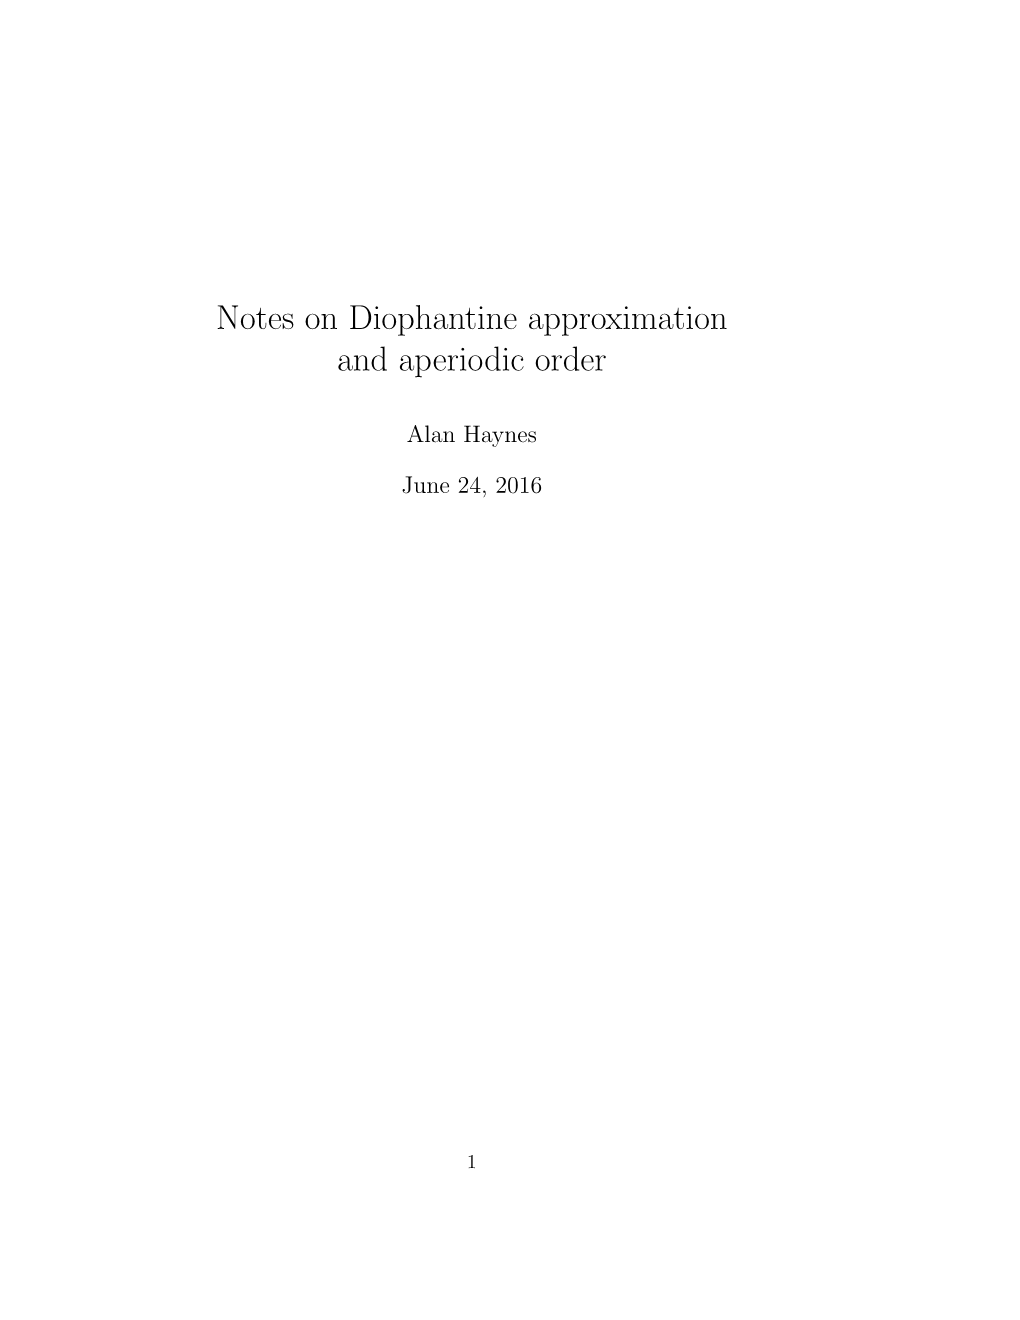 Notes on Diophantine Approximation and Aperiodic Order